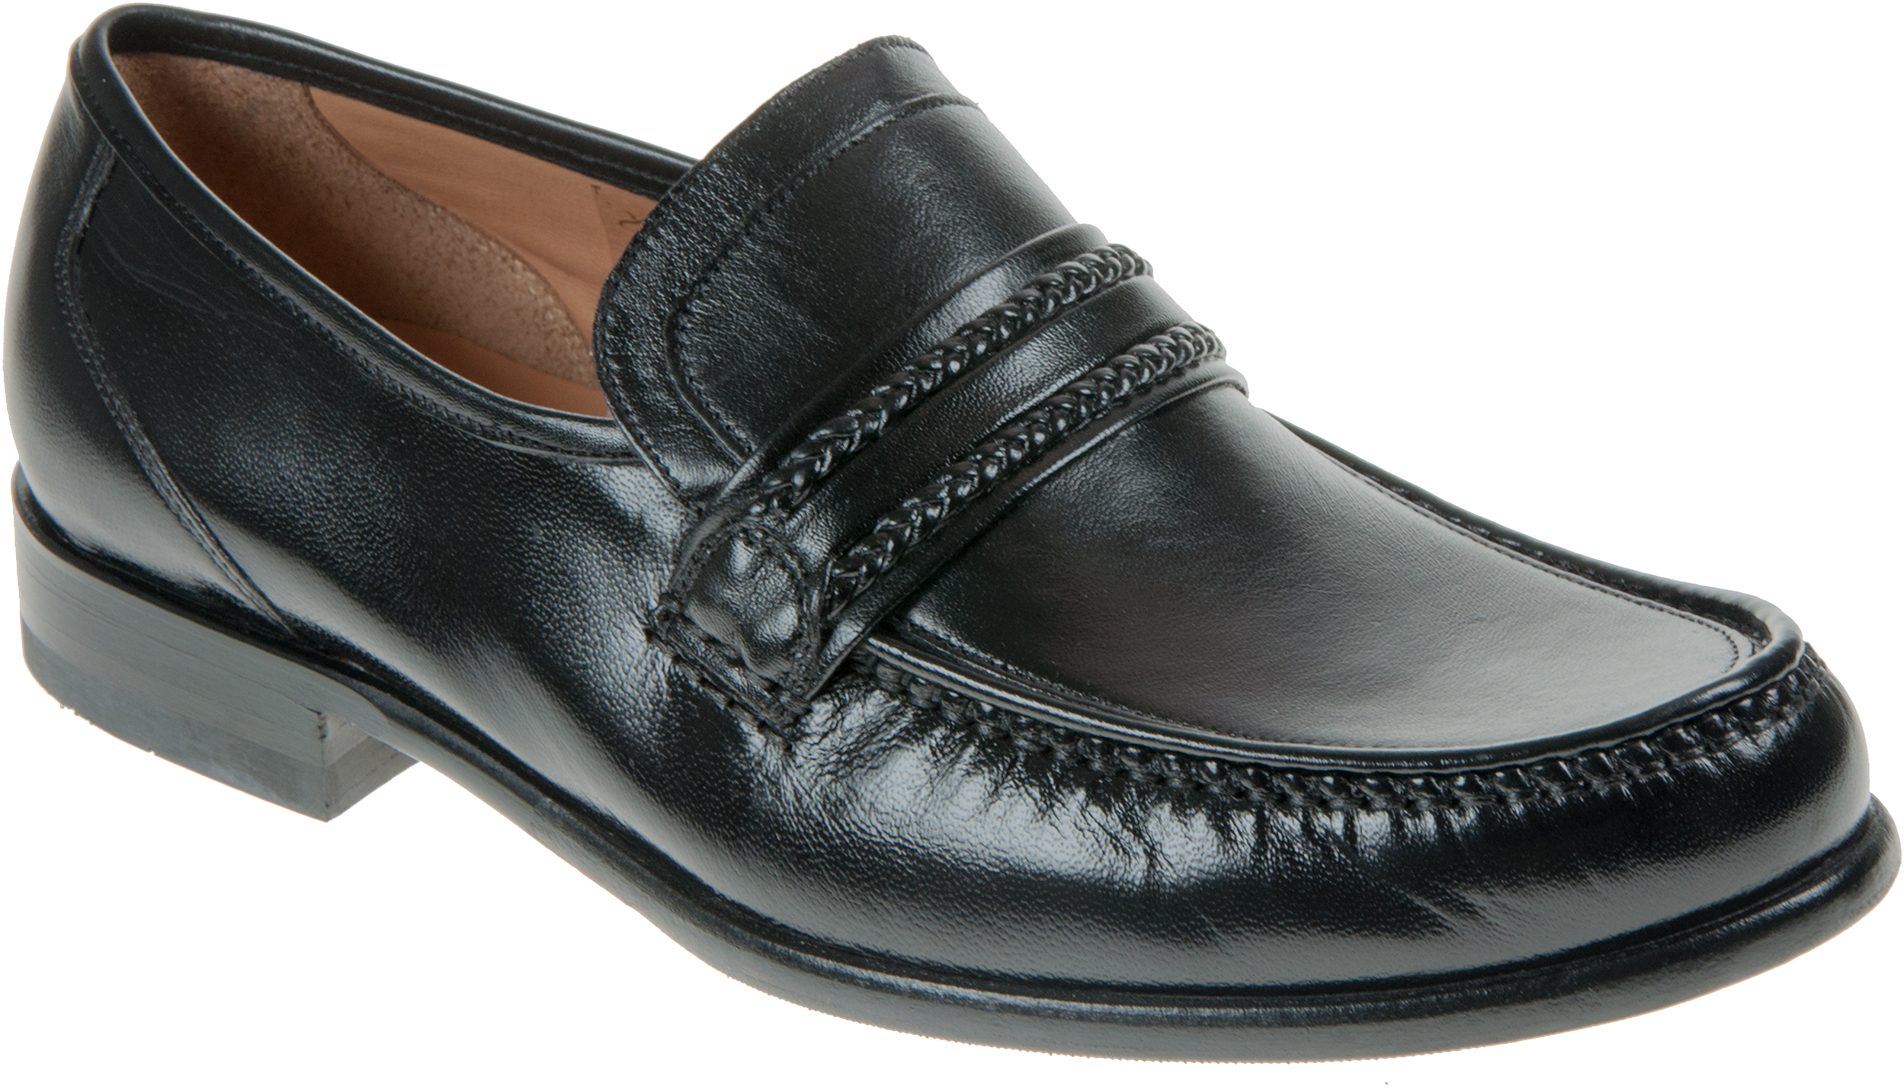 Loake Rome Black - Formal Shoes - Humphries Shoes